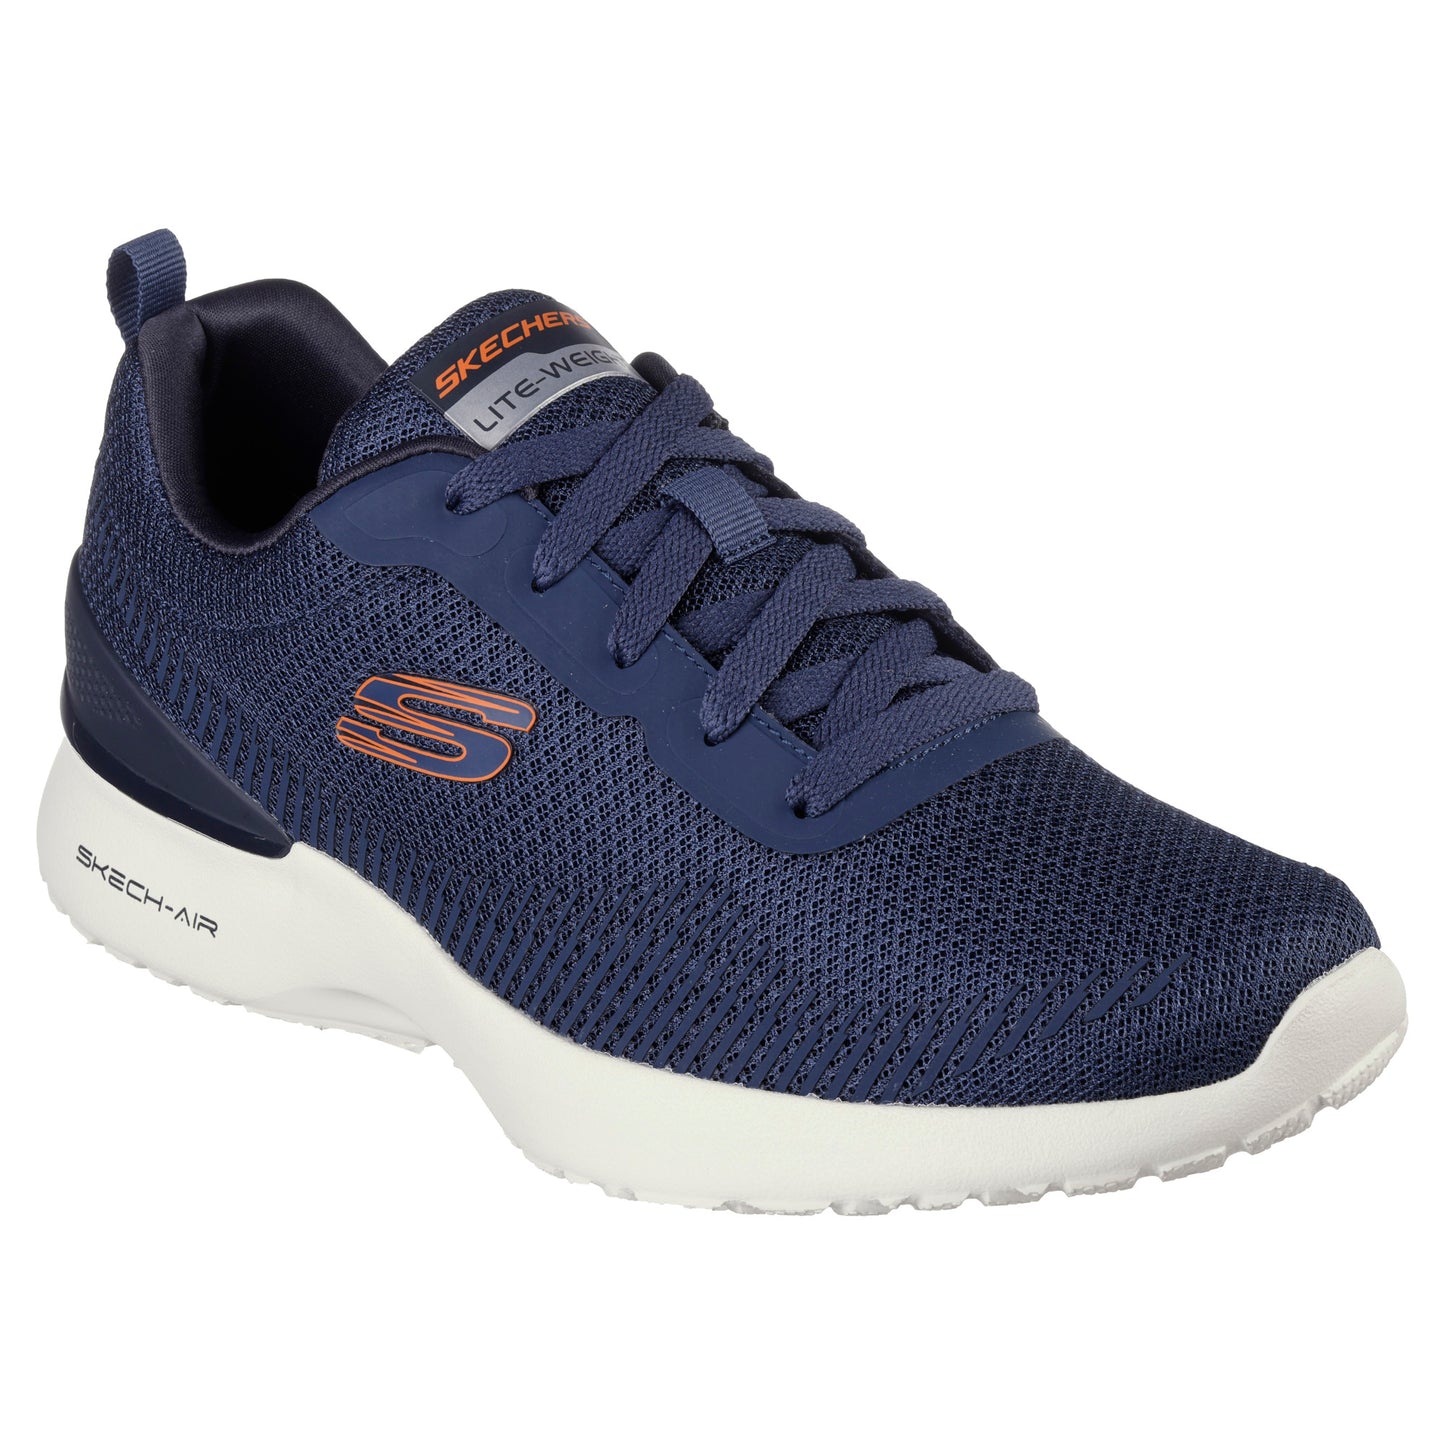 Skechers 232691 Skech-Air Dynamight-Bliton Navy Trainers